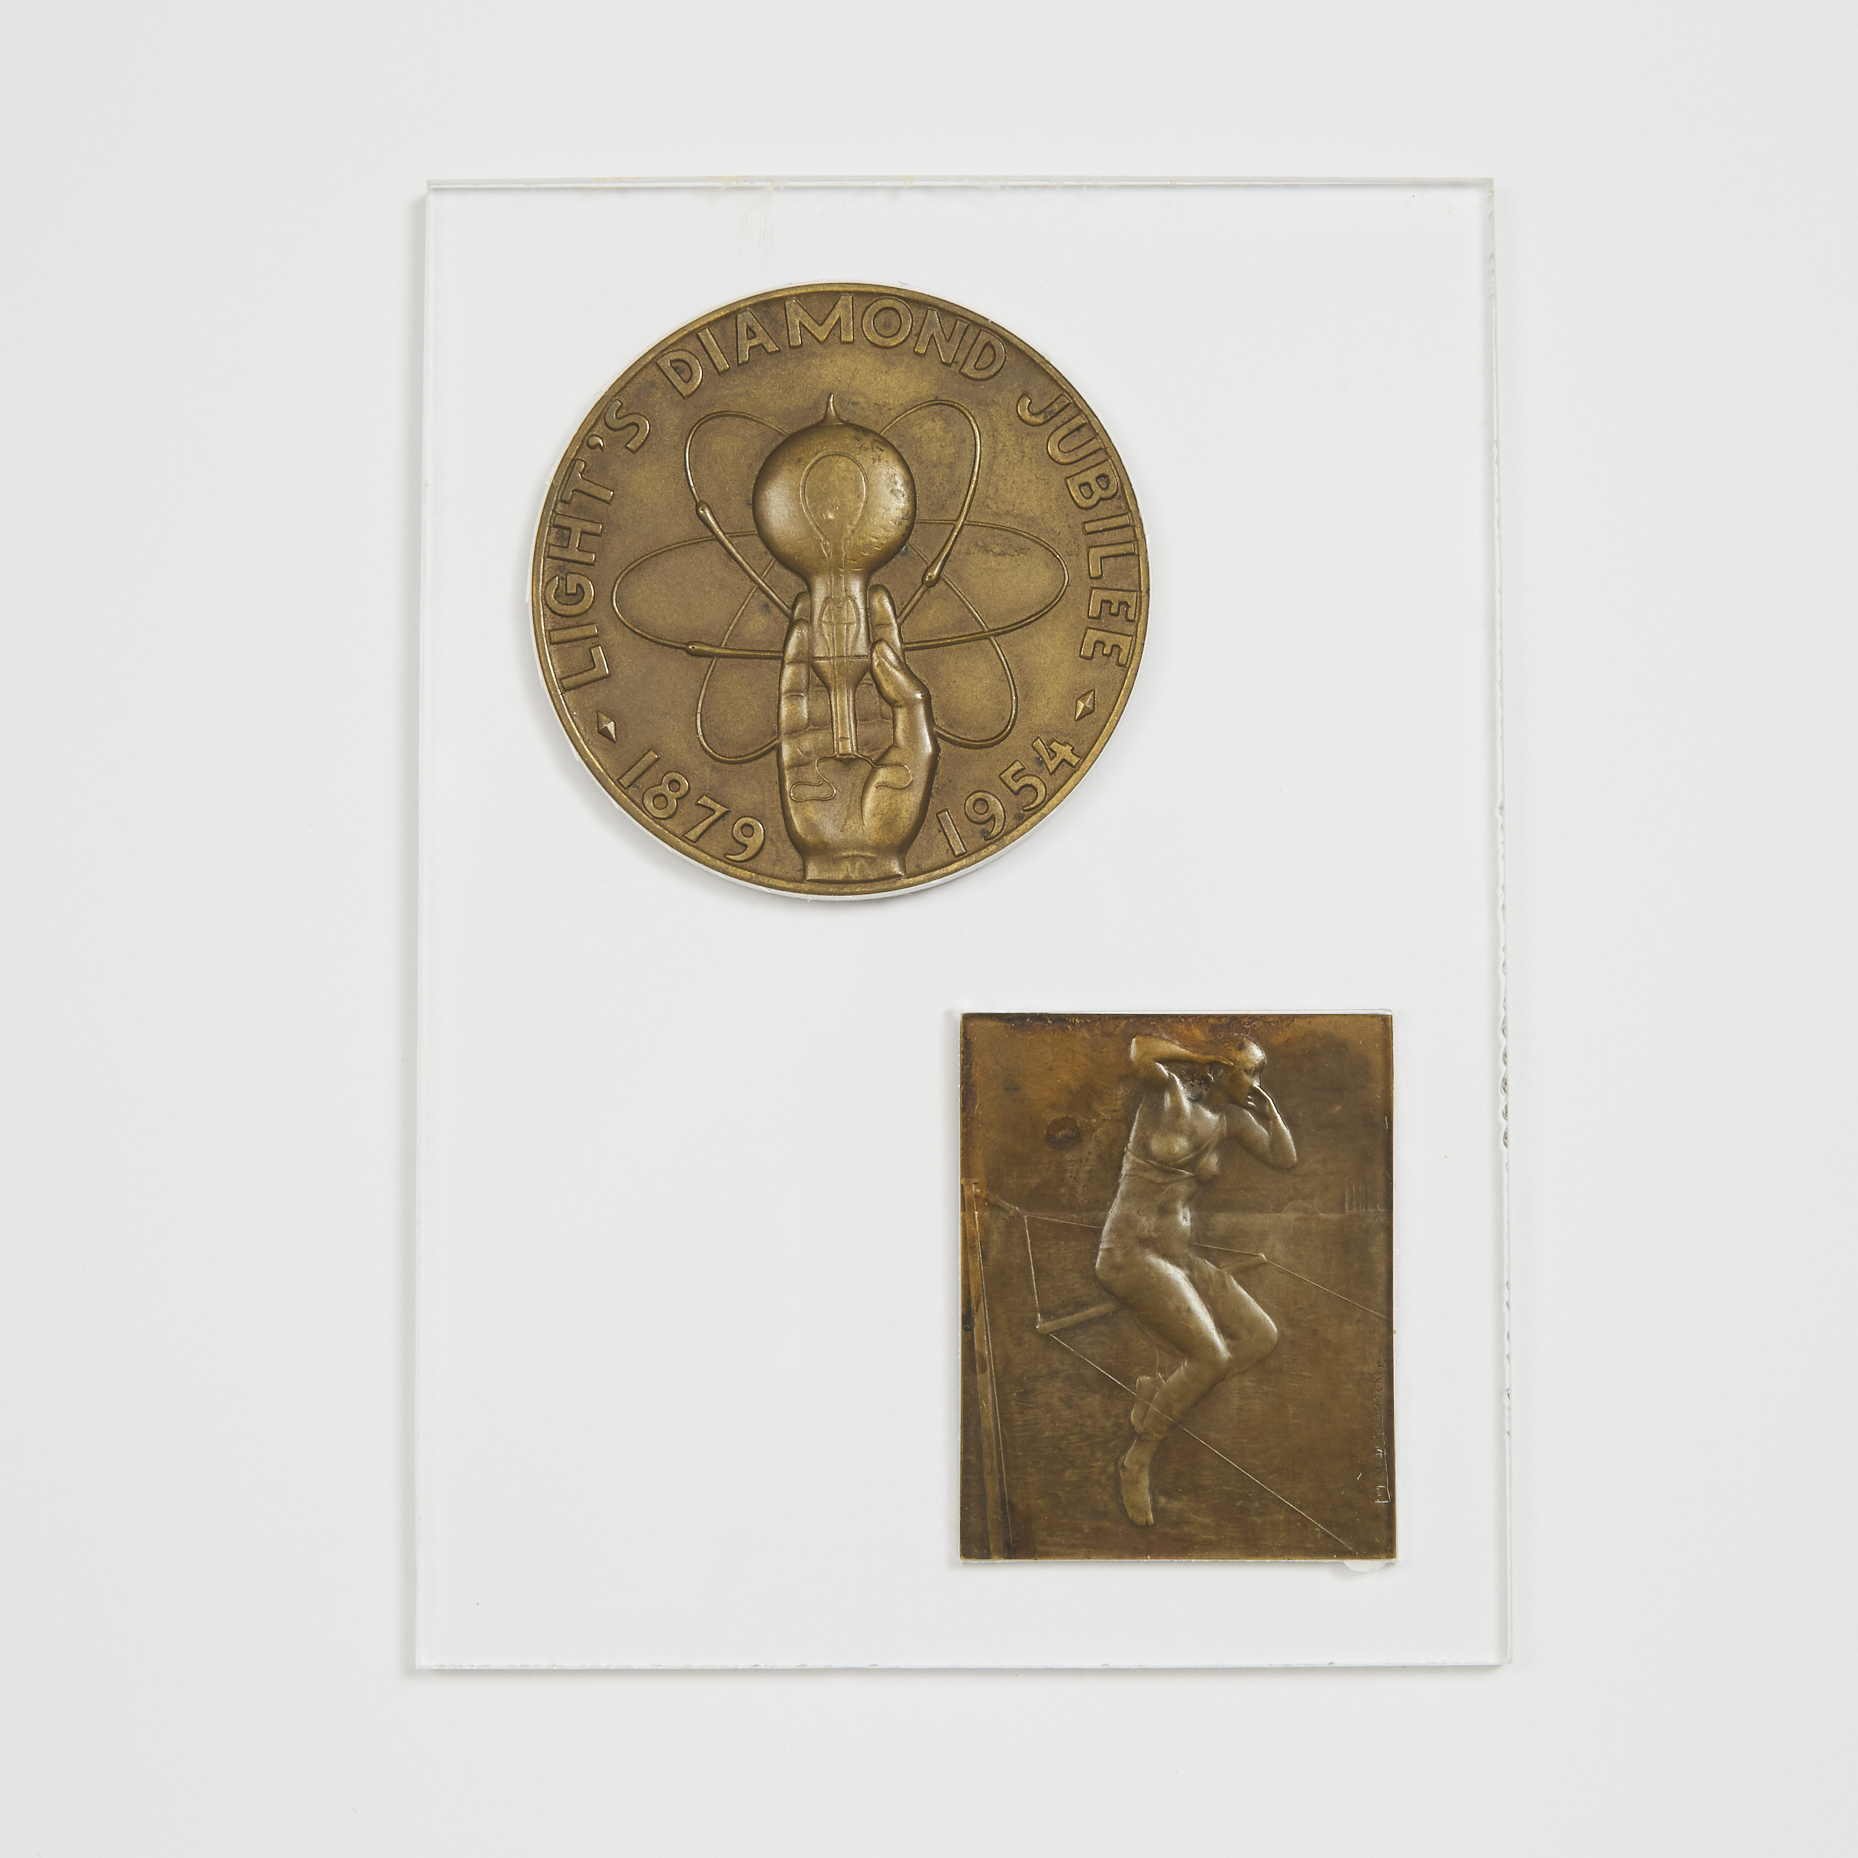 Two Bronze Medals Commemorating